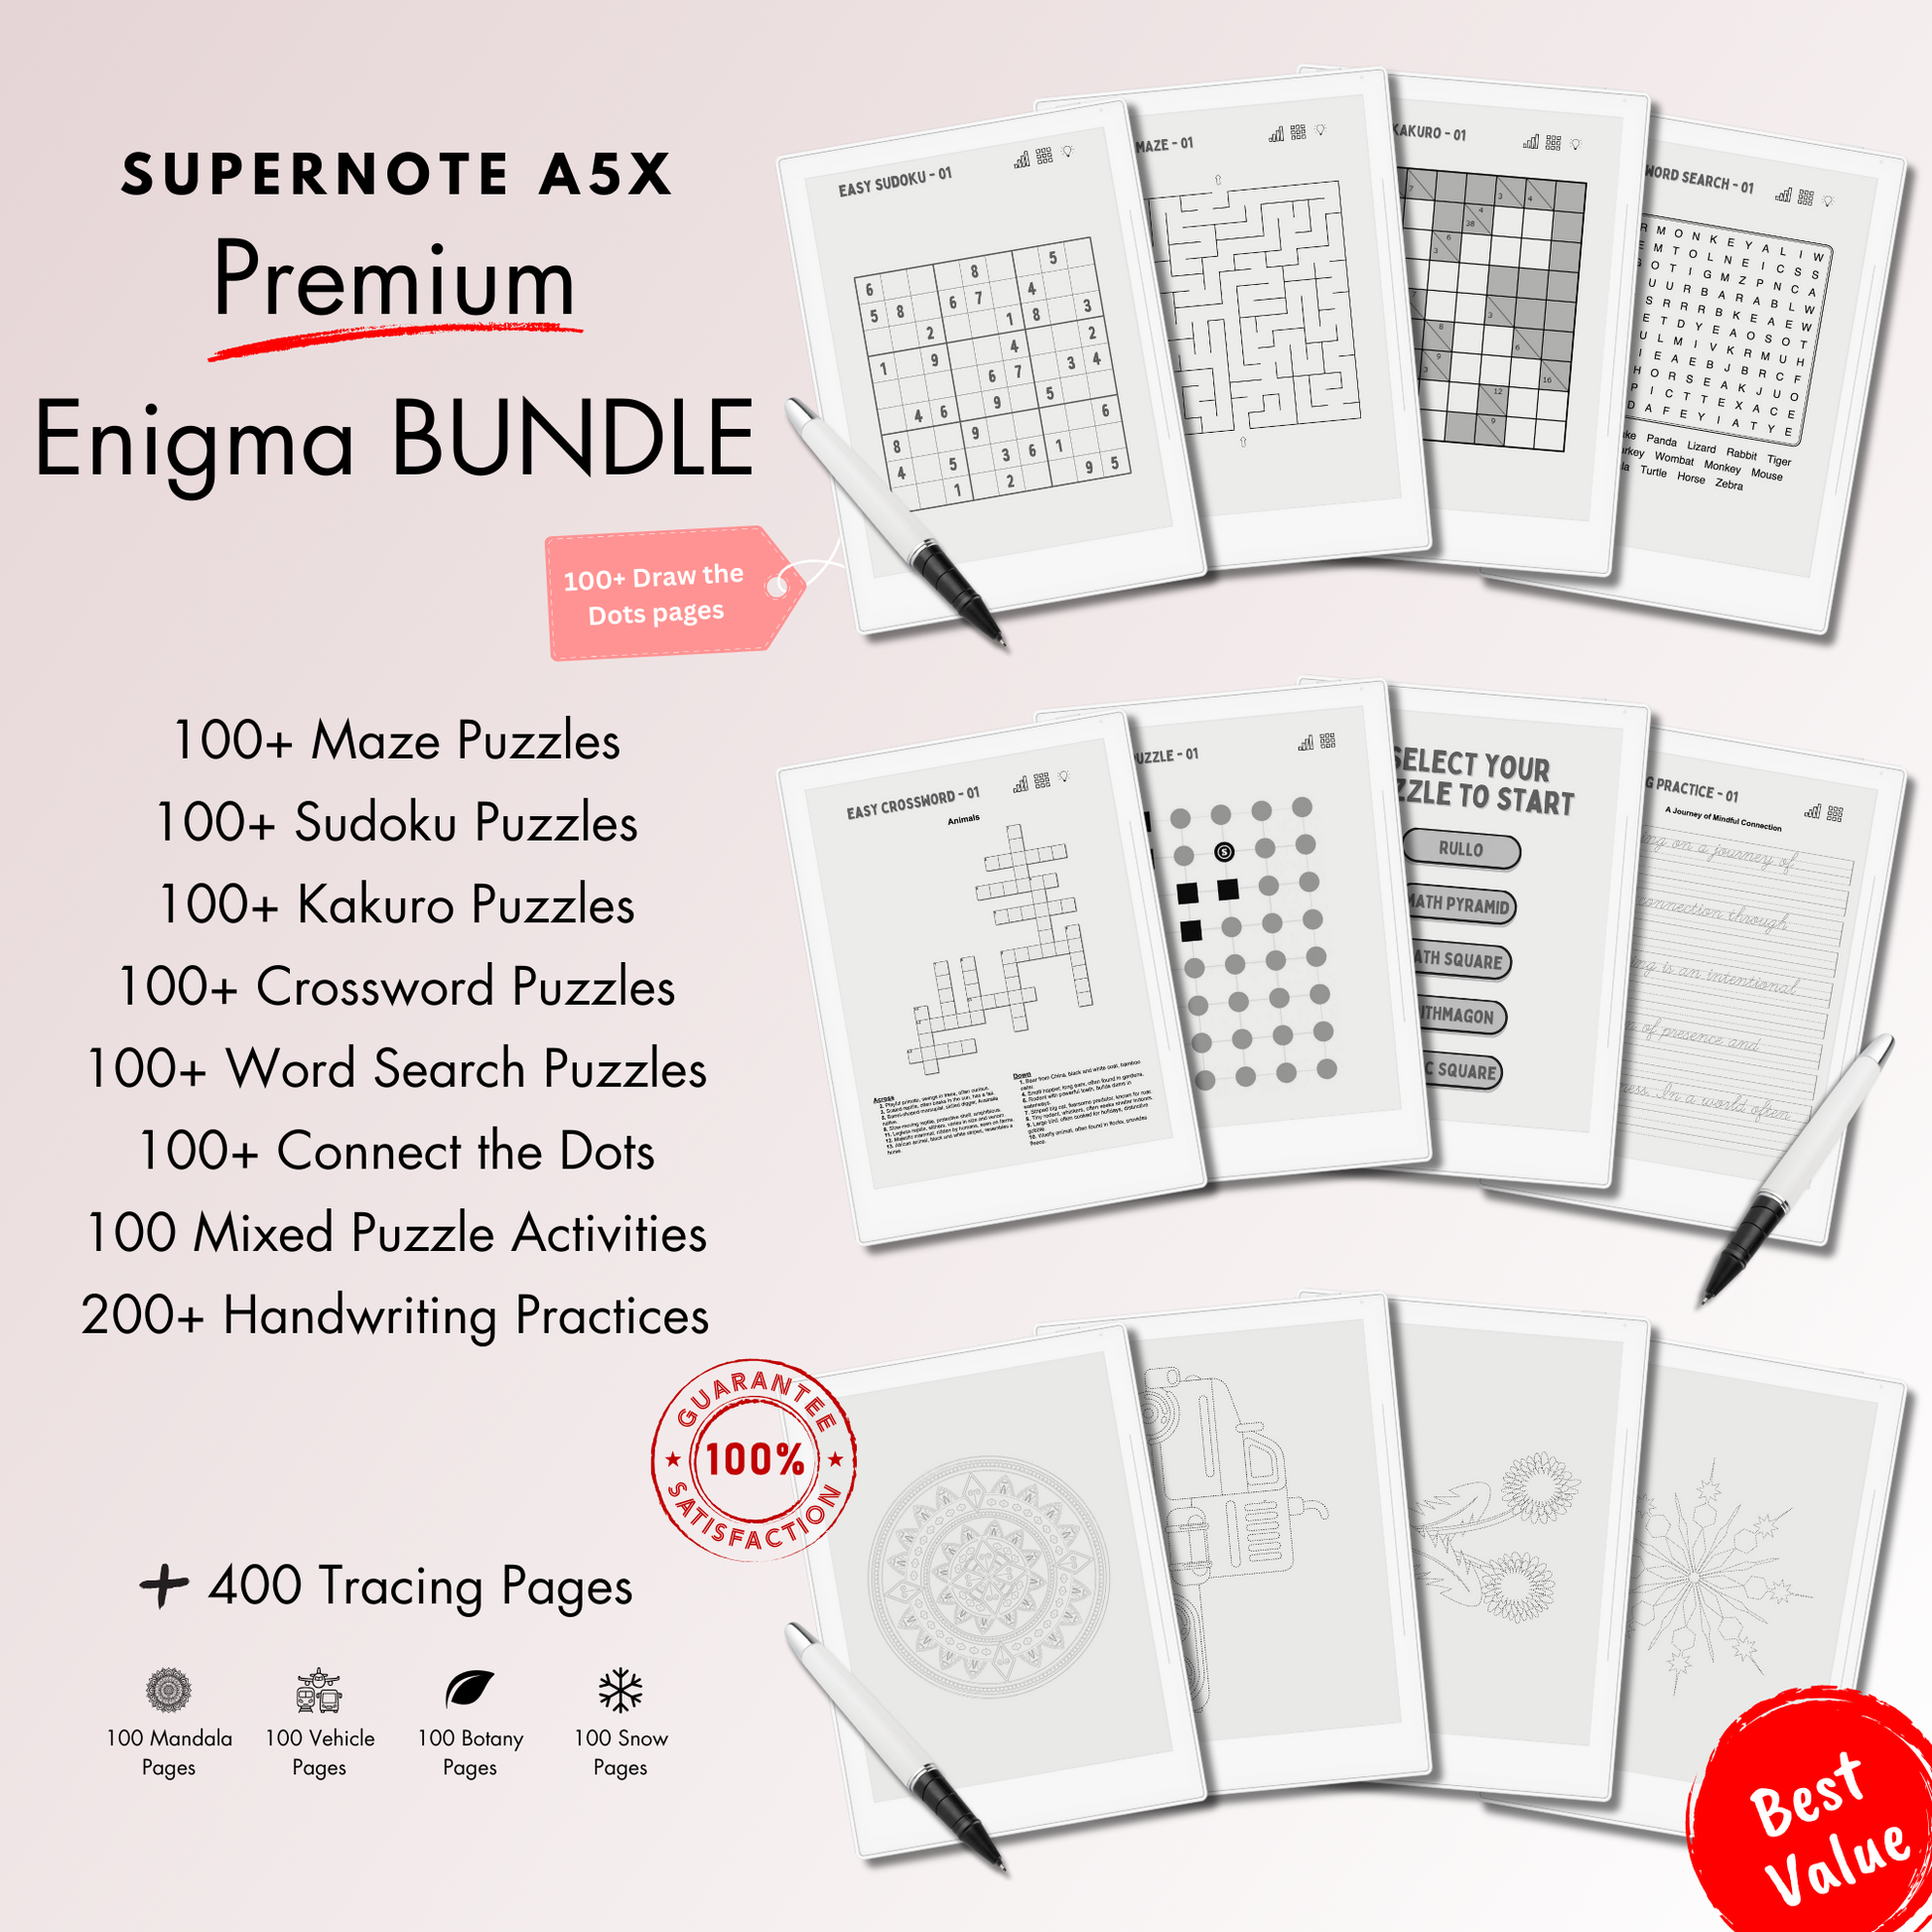 This is a Digital Bundle which includes the puzzles of 100+ Sudoku, 100+ Mazes, 100+ Kakuro, 100+ Word Search, 100+ Crossword, 100+ Connect the Dots, 100 Mixed Puzzles of various activities and 200+ Handwriting Practices tailored for Supernote A5X and A6X.